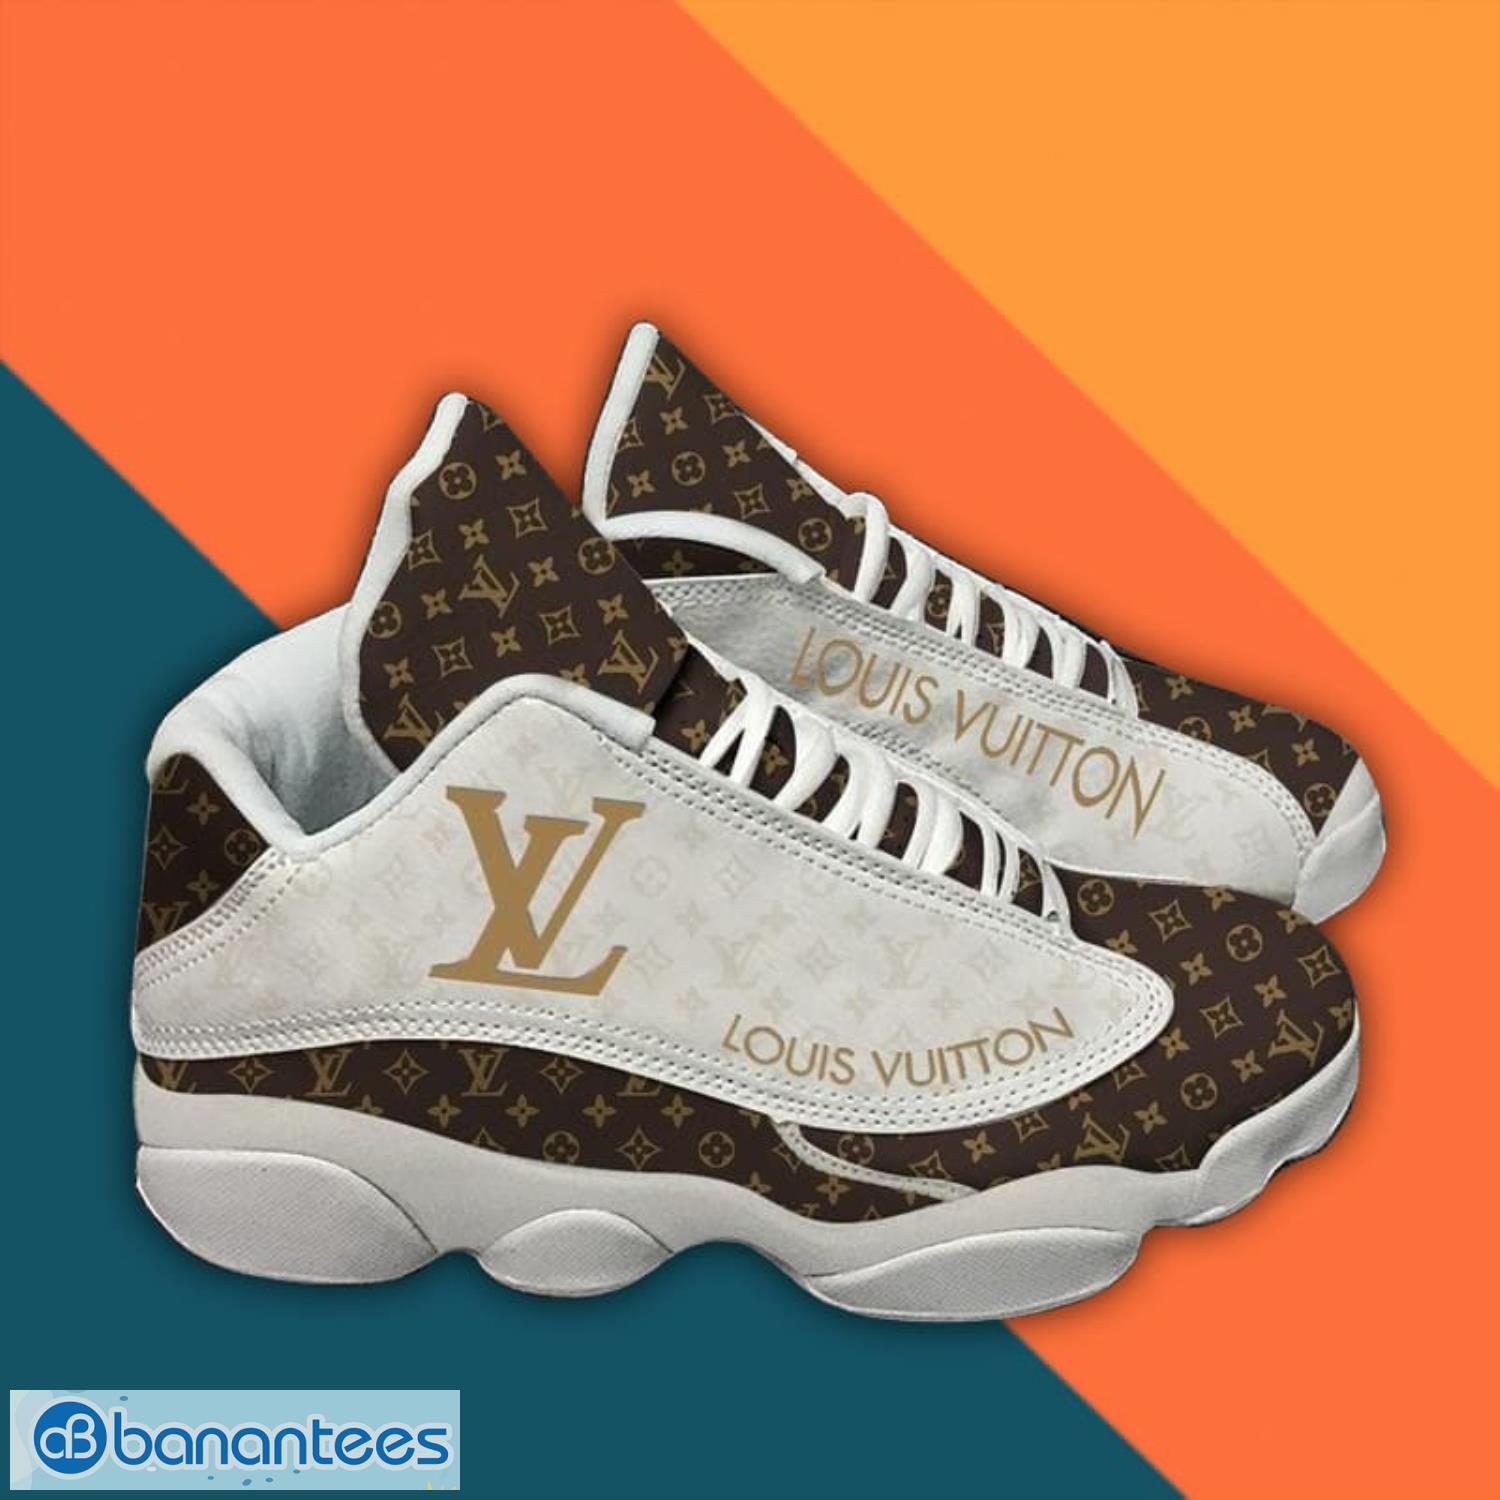 Louis Vuitton White And Brown Air Jordan 13 Sneaker Shoes Product Photo 2